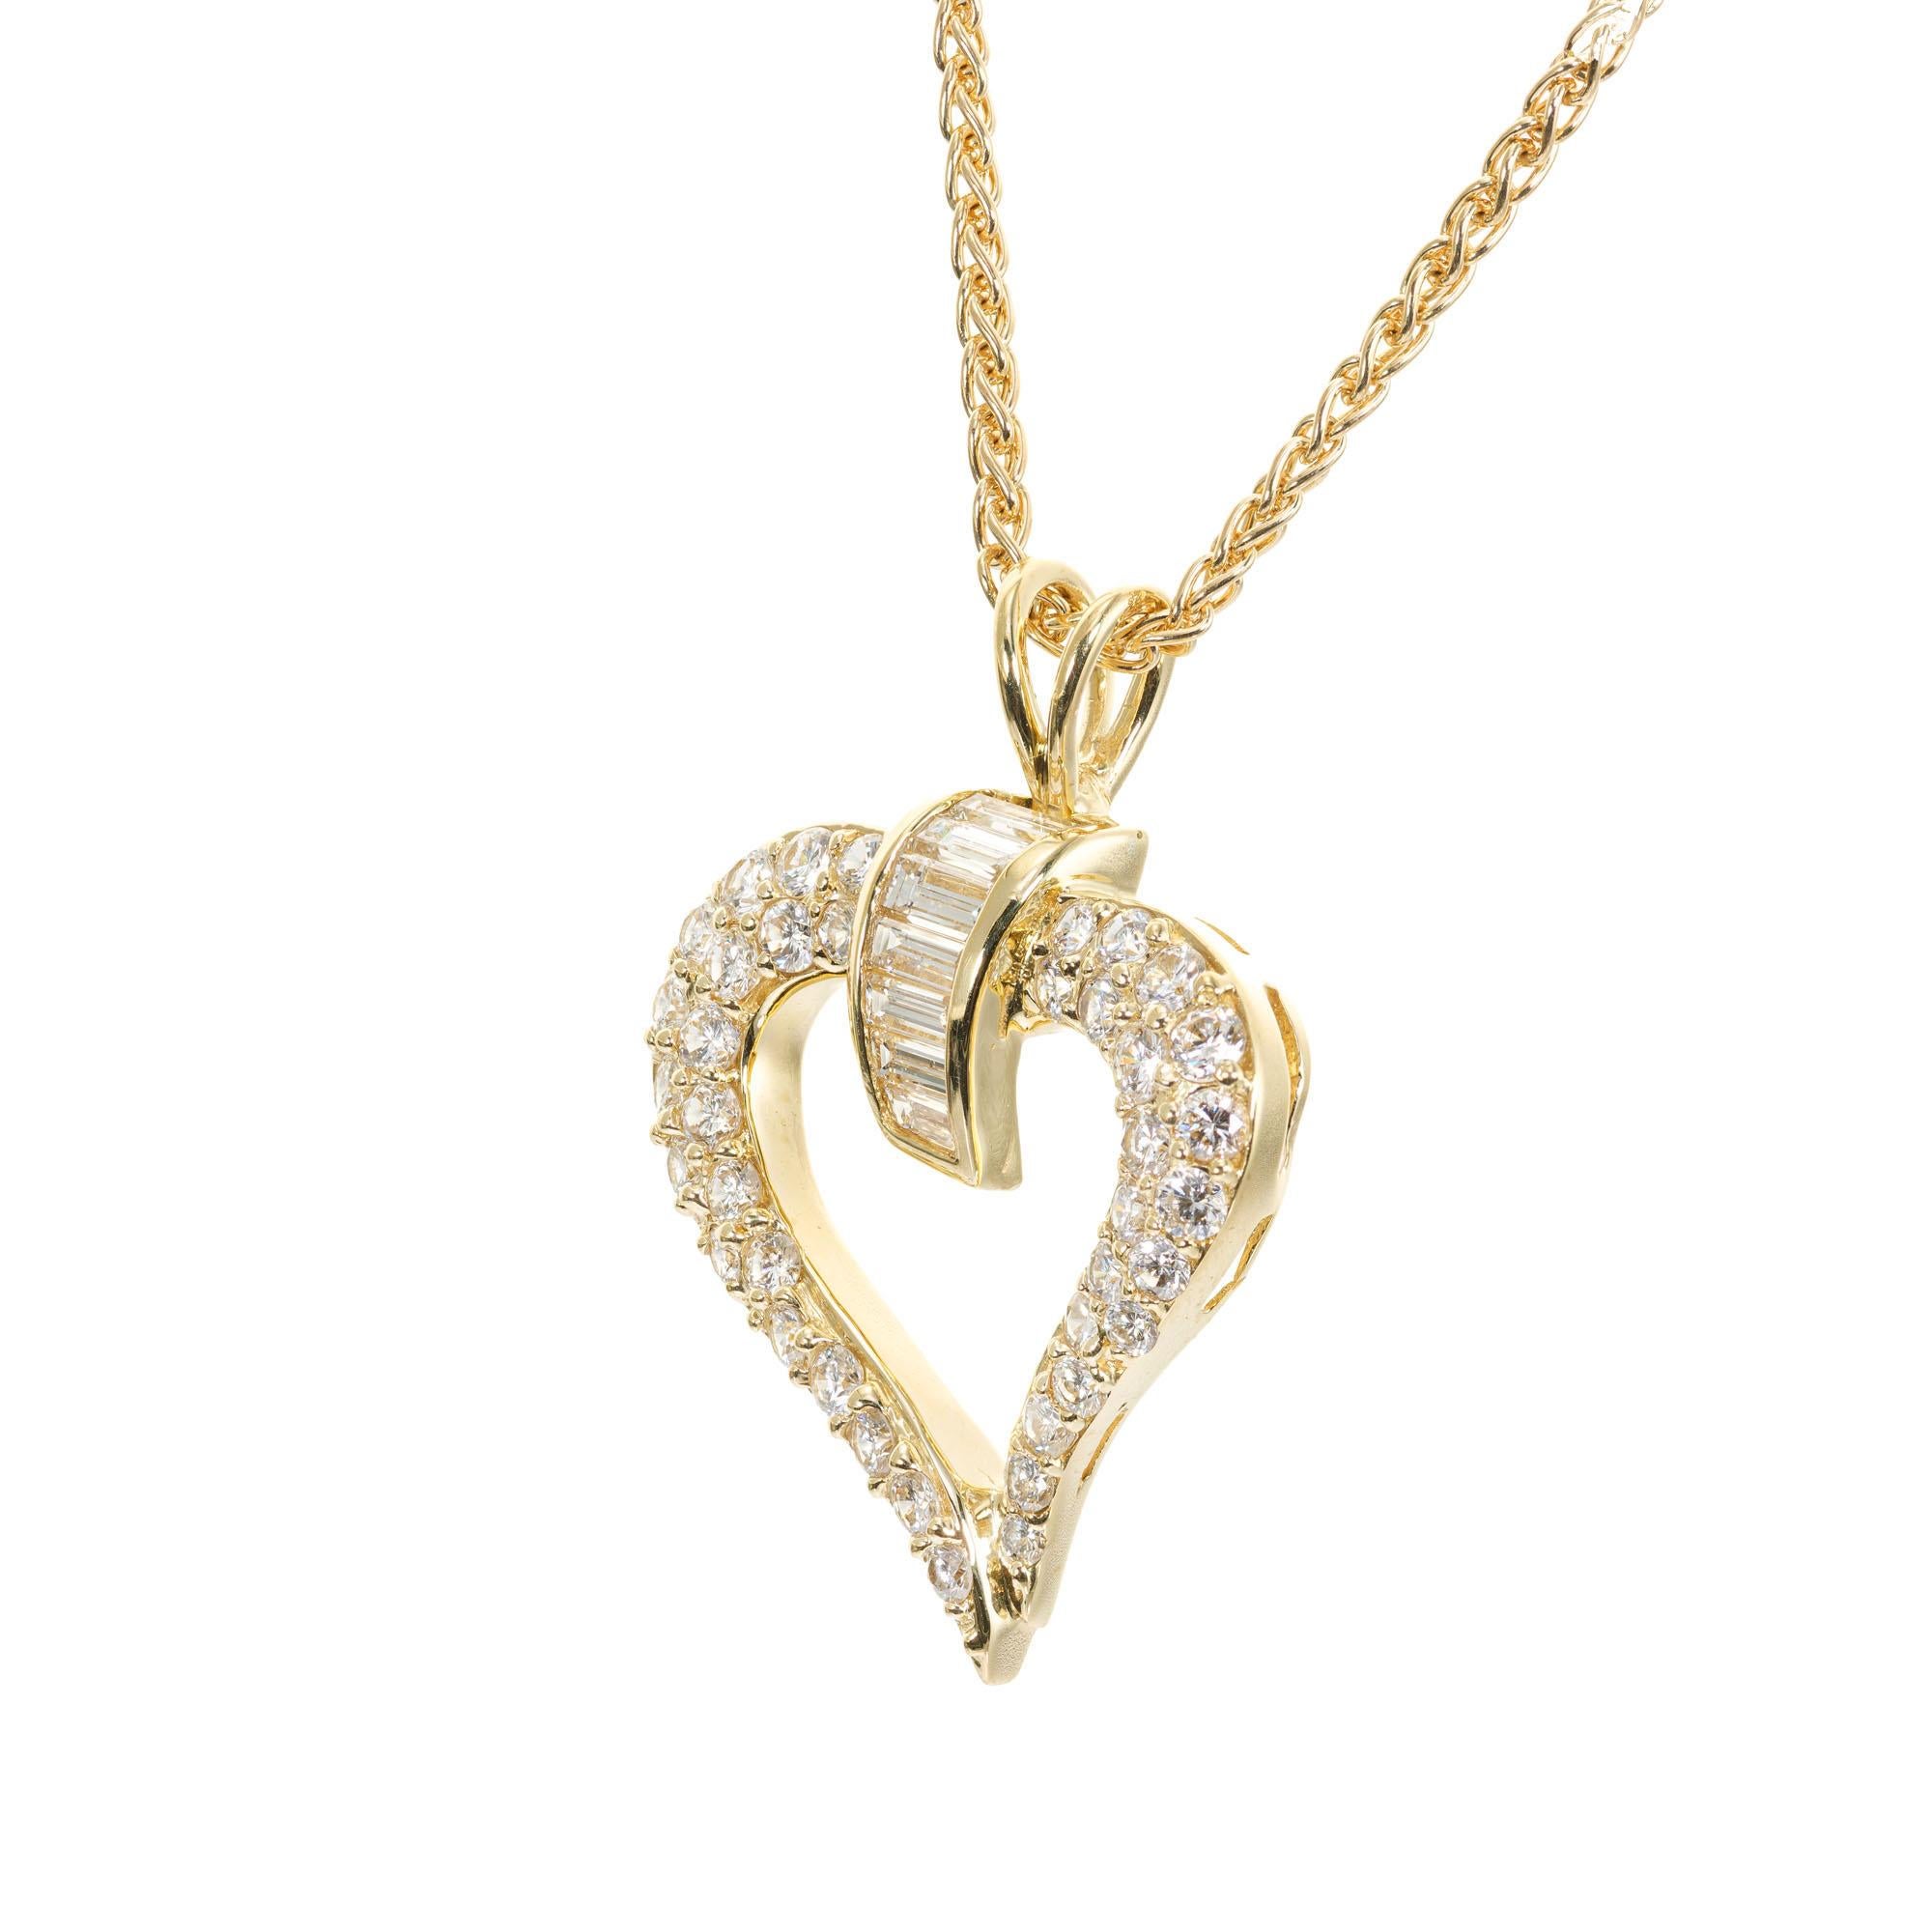 Open heart pendant necklace. 39 round brilliant cut diamond heart halo with 7 straight baguette diamonds set in 18k yellow gold. Chain 18 inches in length. 

39 round brilliant cut diamonds, F-G VS-SI approx. 1.50cts
7 straight cut baguette